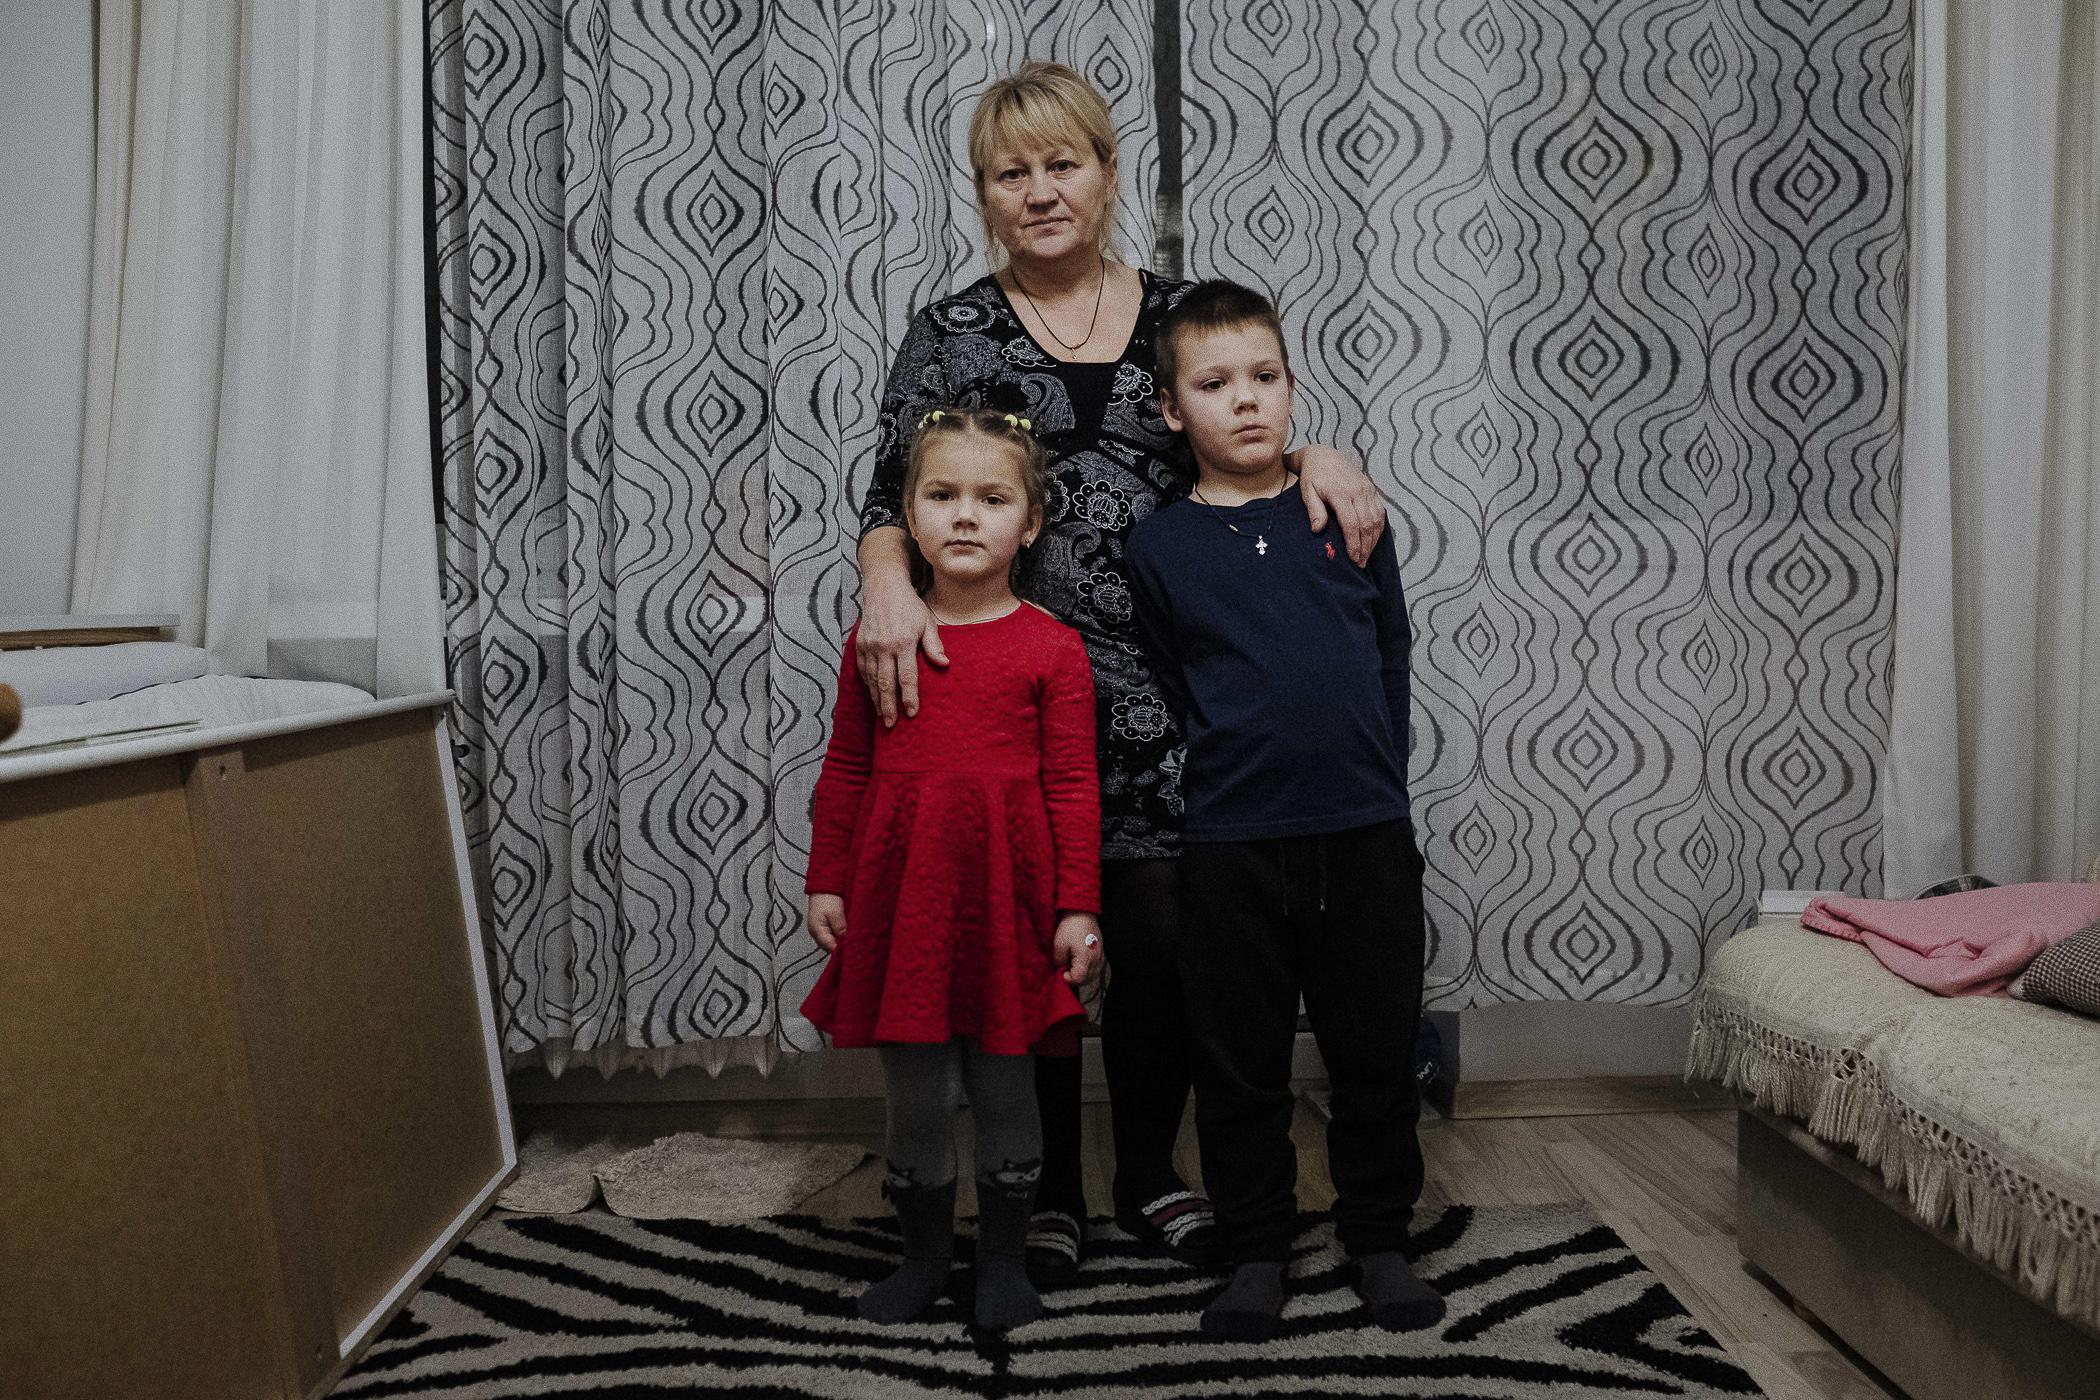 compelled to flee - Ana (56 years old) is from Minsk. She had to flee through...